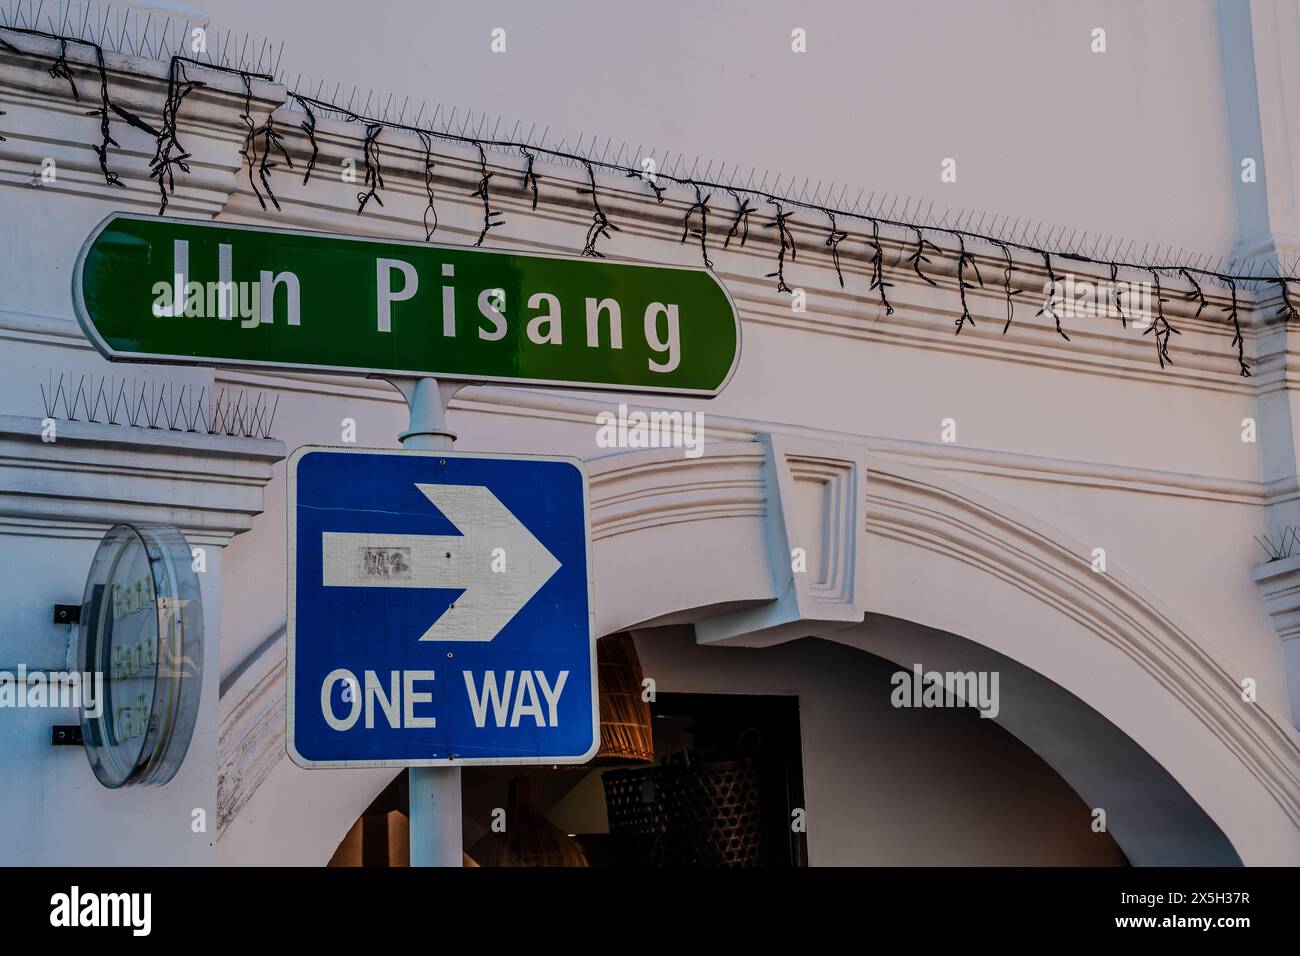 An image capturing a vibrant Jln Pisang street sign next to a blue one way directional arrow on a white architectural background with security feature Stock Photo